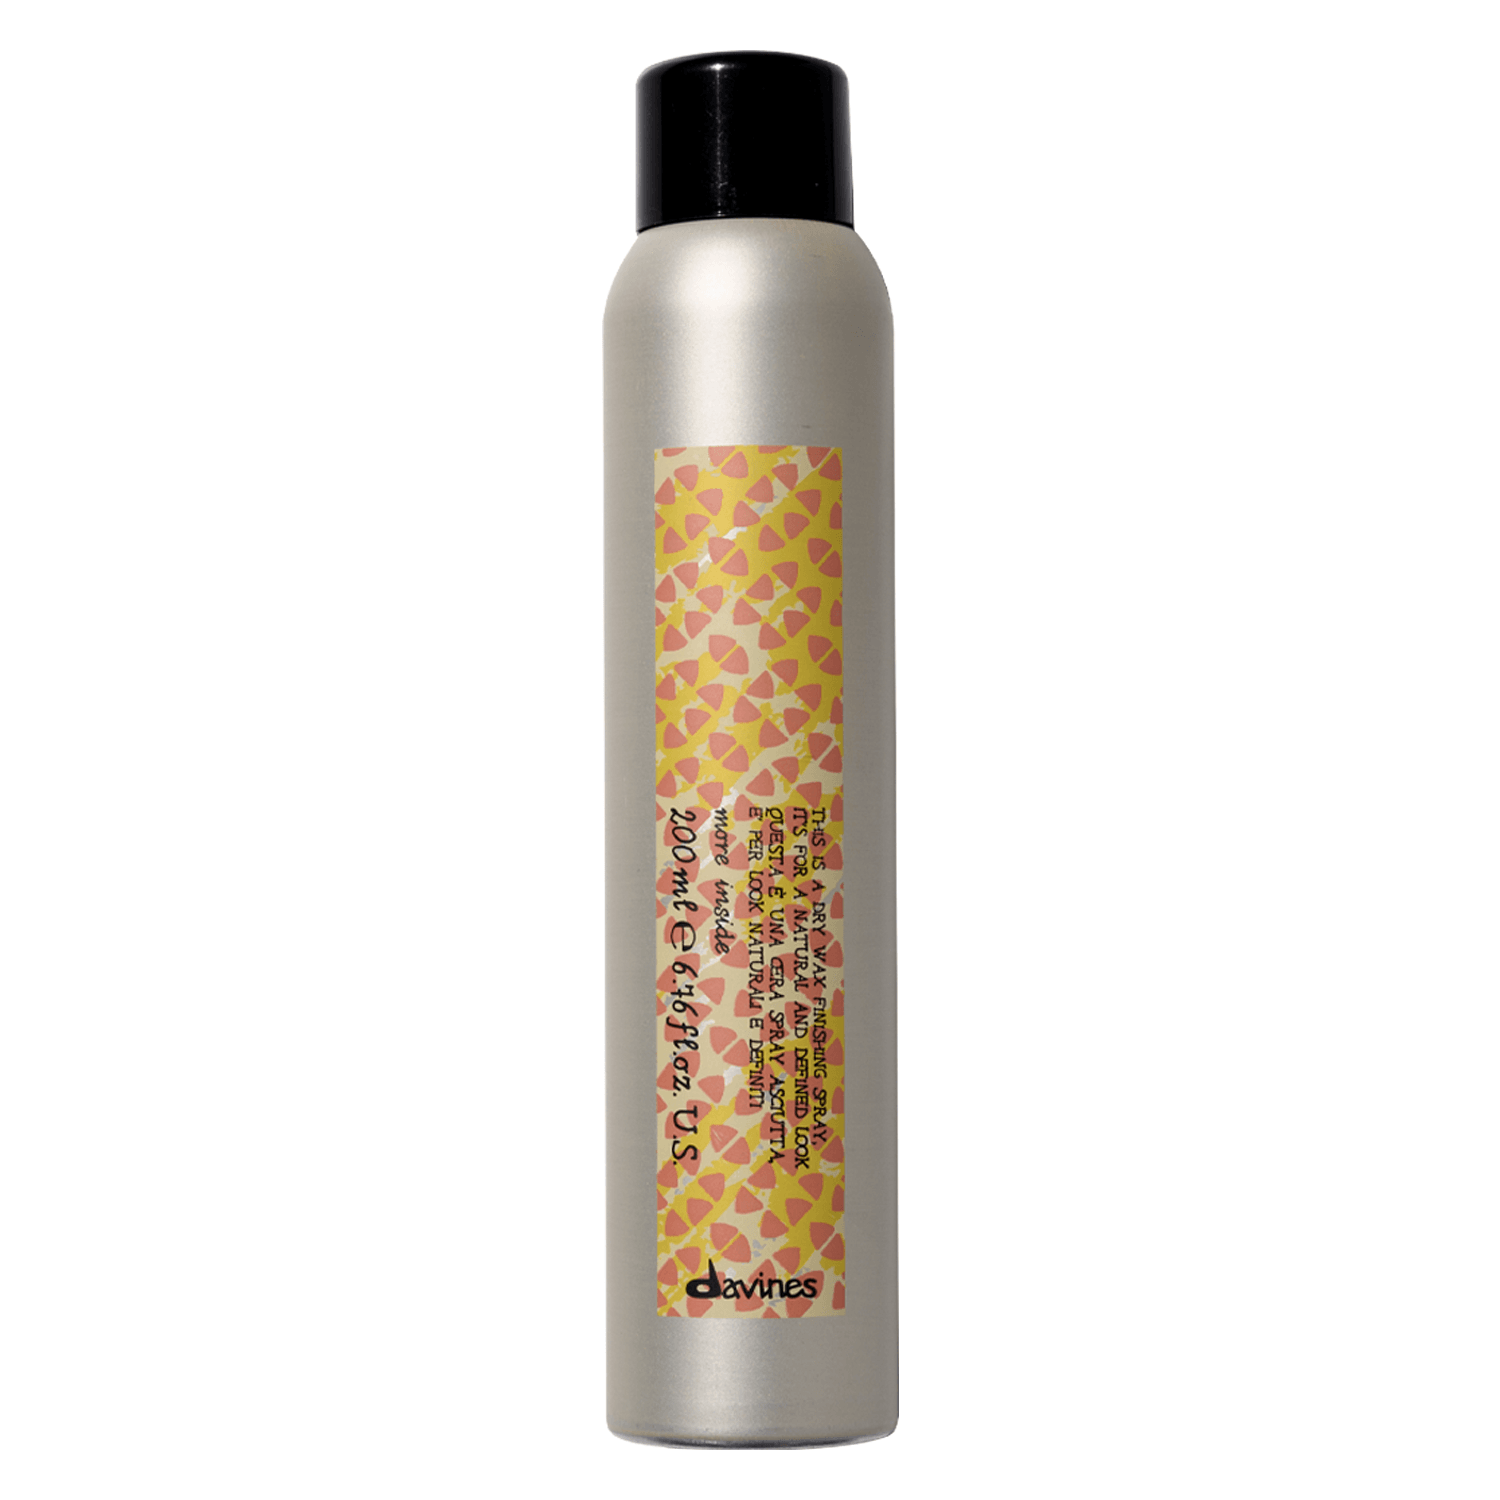 Produktbild von More Inside - This is a Dry Wax Finishing Spray